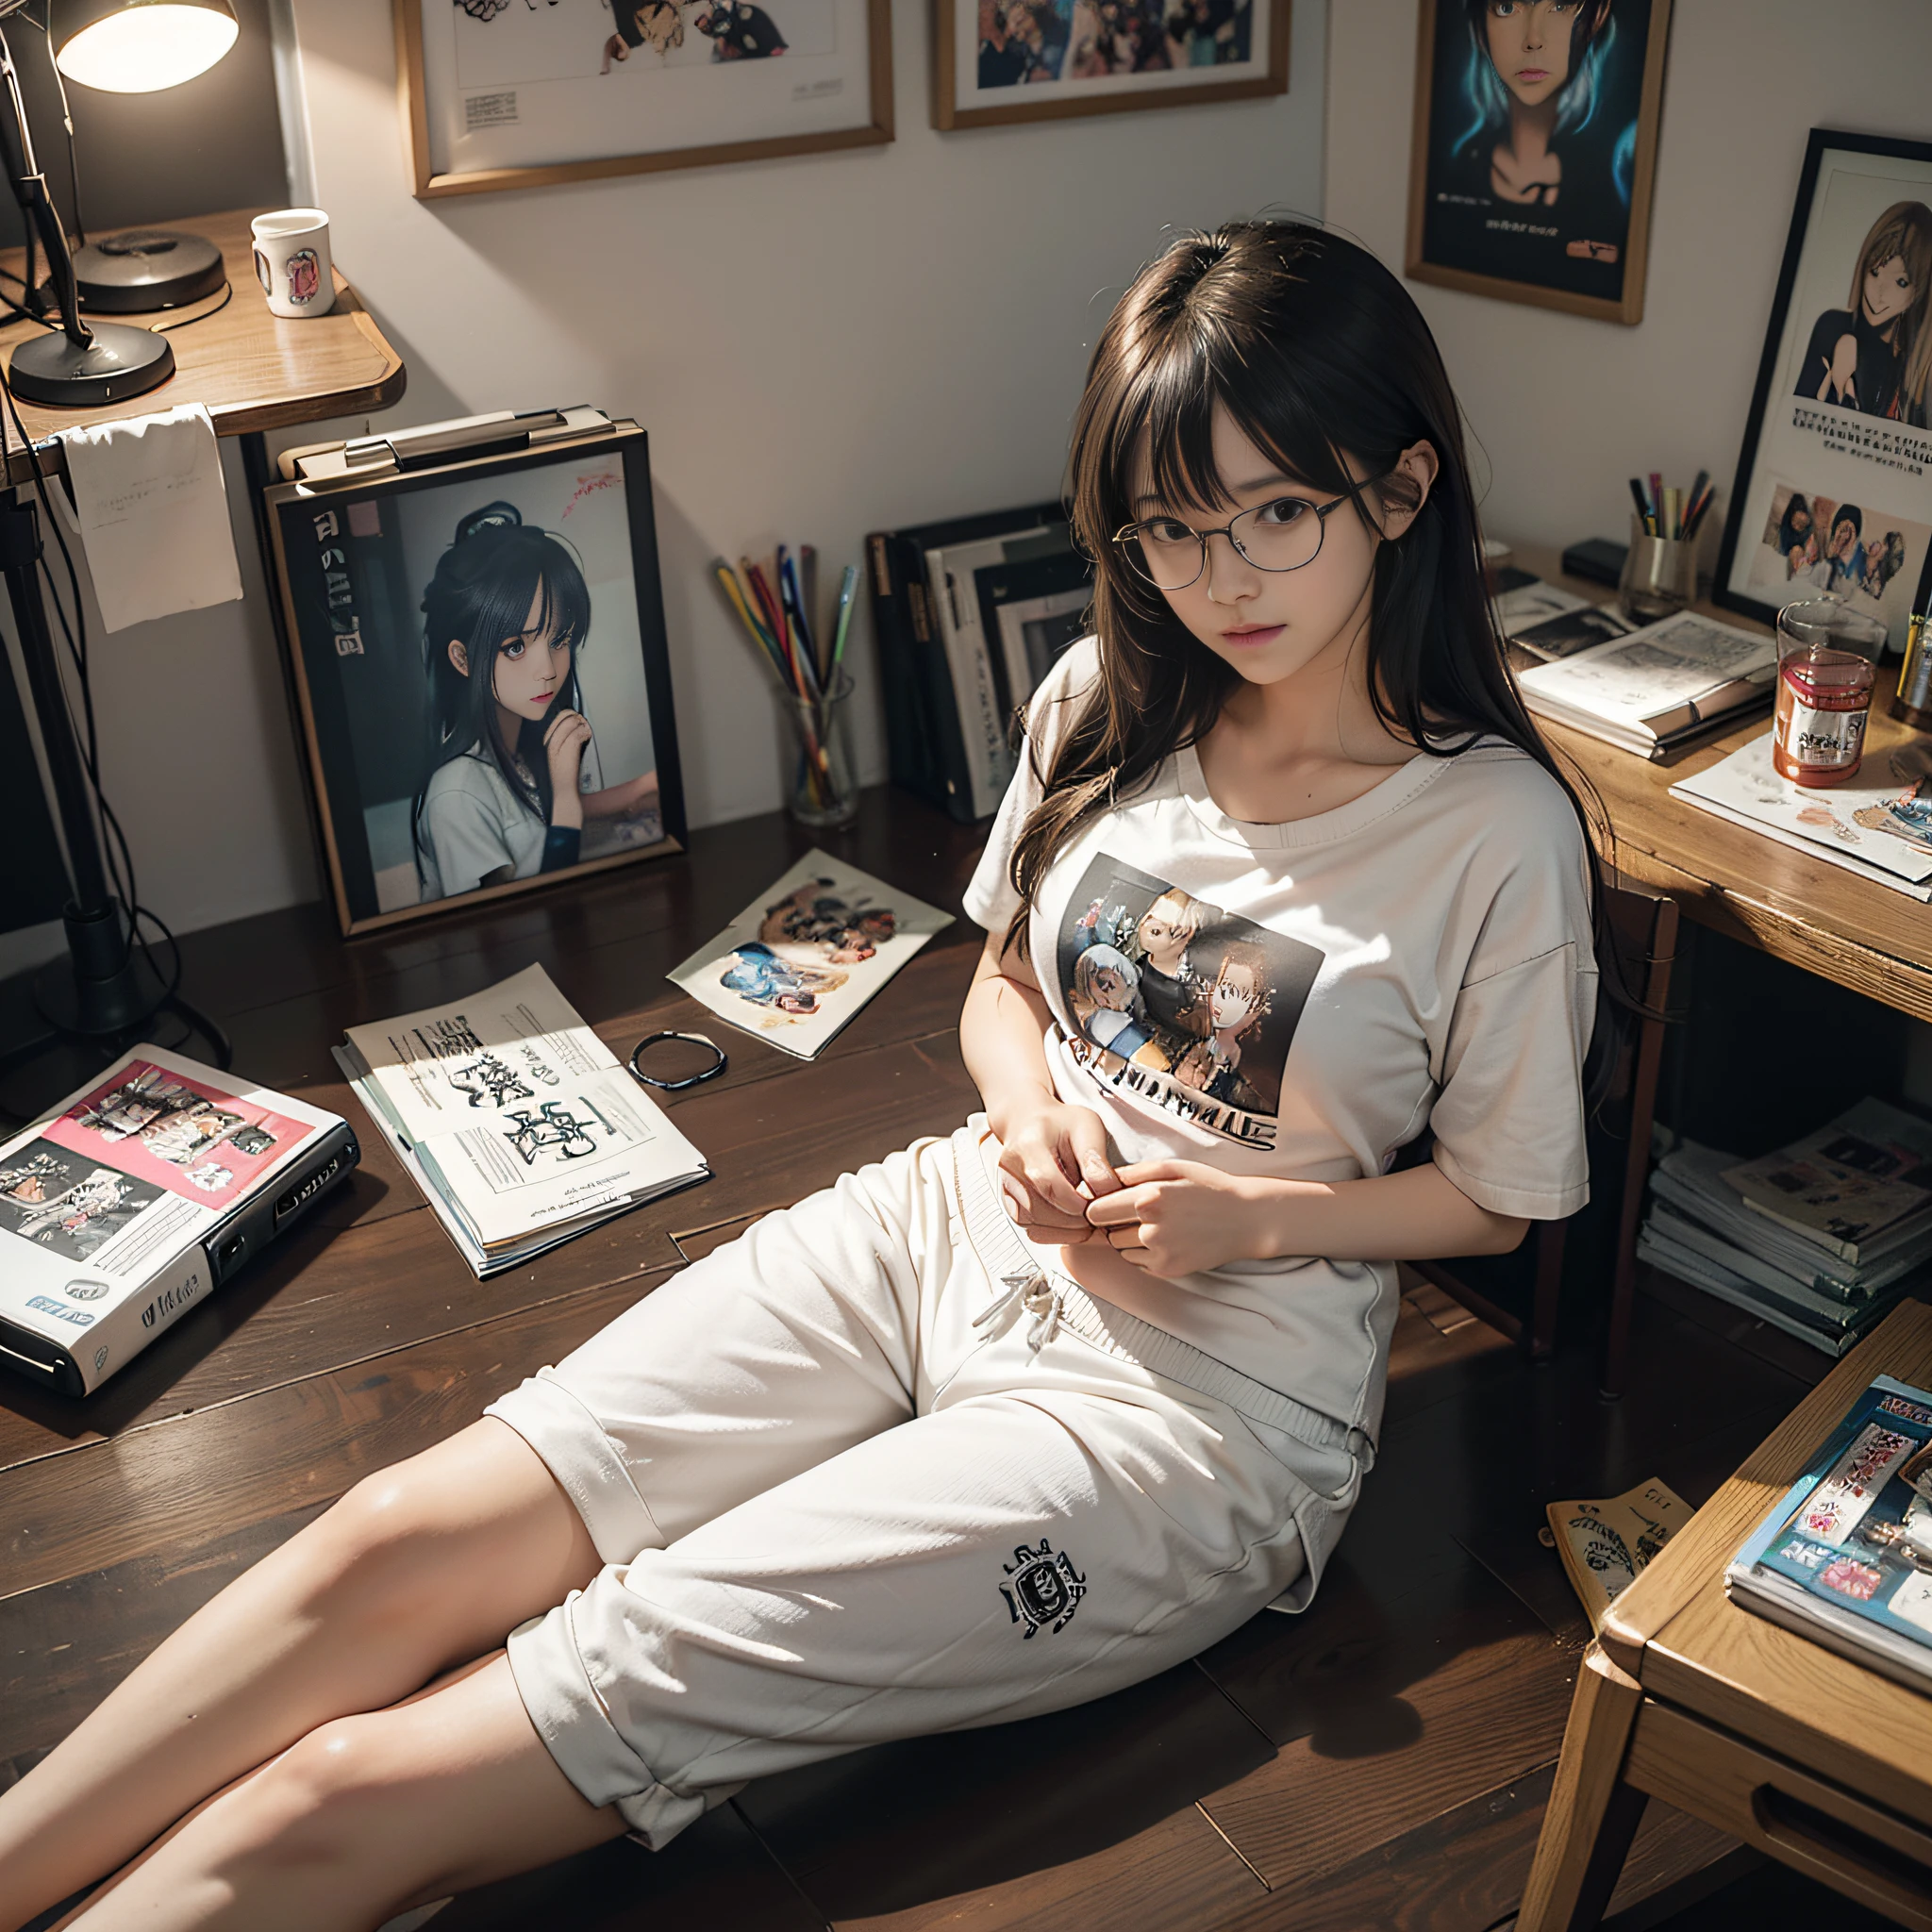 (8k, RAW photos, best quality, masterpieces, : 1.2), (realistic, photorealistic: 1.37), (1 girl, solo: 1.3), 18 years old Japan girls living in a dirty room, (dreamy, soft pastels, bedroom, cozy atmosphere, warm lighting: 1.2), anime otaku girls, black hair, short hair, (disheveled hair, unkempt hair: 1.3), bangs, smile, happy look, small bust, wearing glasses, (crop t-shirt with anime character print: 1.3), sweatpants, shorts, loungewear, headphones, sitting on the floor, scruffy posture, cross-legged, relaxed, cheerful, (heaped comics littered on the floor: 1.3), (littered with garbage, messy room, Clothes left undressed on the floor, empty cans lying on the floor: 1.3), (figure collection case, decorated with many anime character figures: 1.3), (many posters of anime characters on the wall: 1.3), stuffed animals, watching anime on the monitor, potato chips on the desk, spilled potato chips, Energy drinks on your desk, ultra-high resolution, physically based rendering, cinematic lighting, dynamic angles